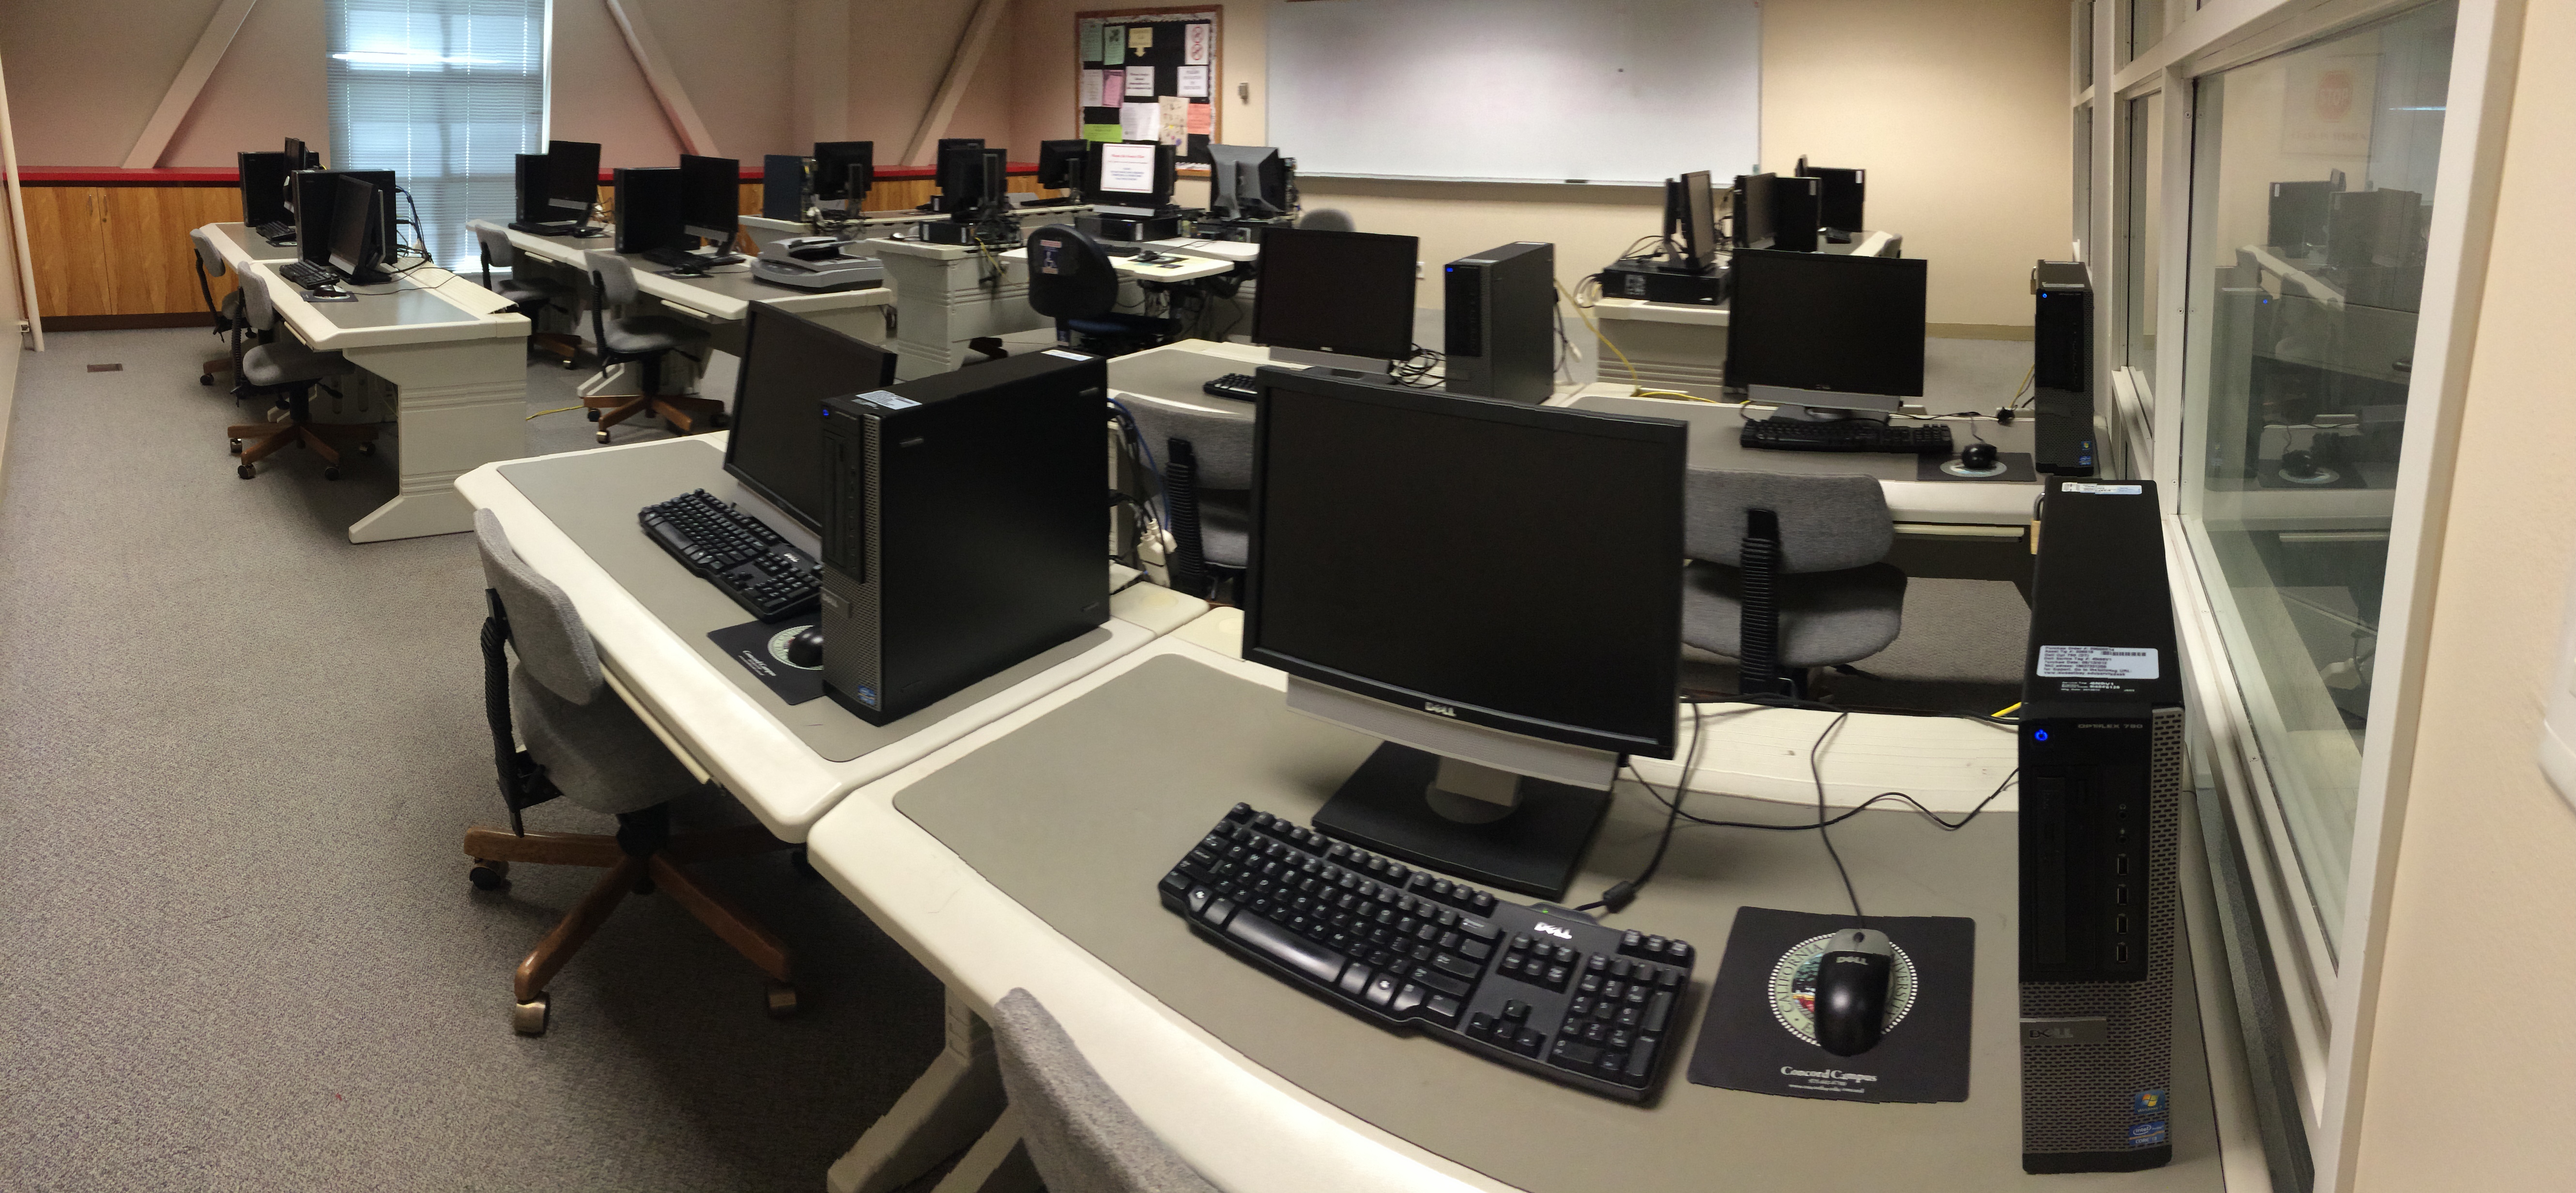 Computers lined up with chairs in the lab